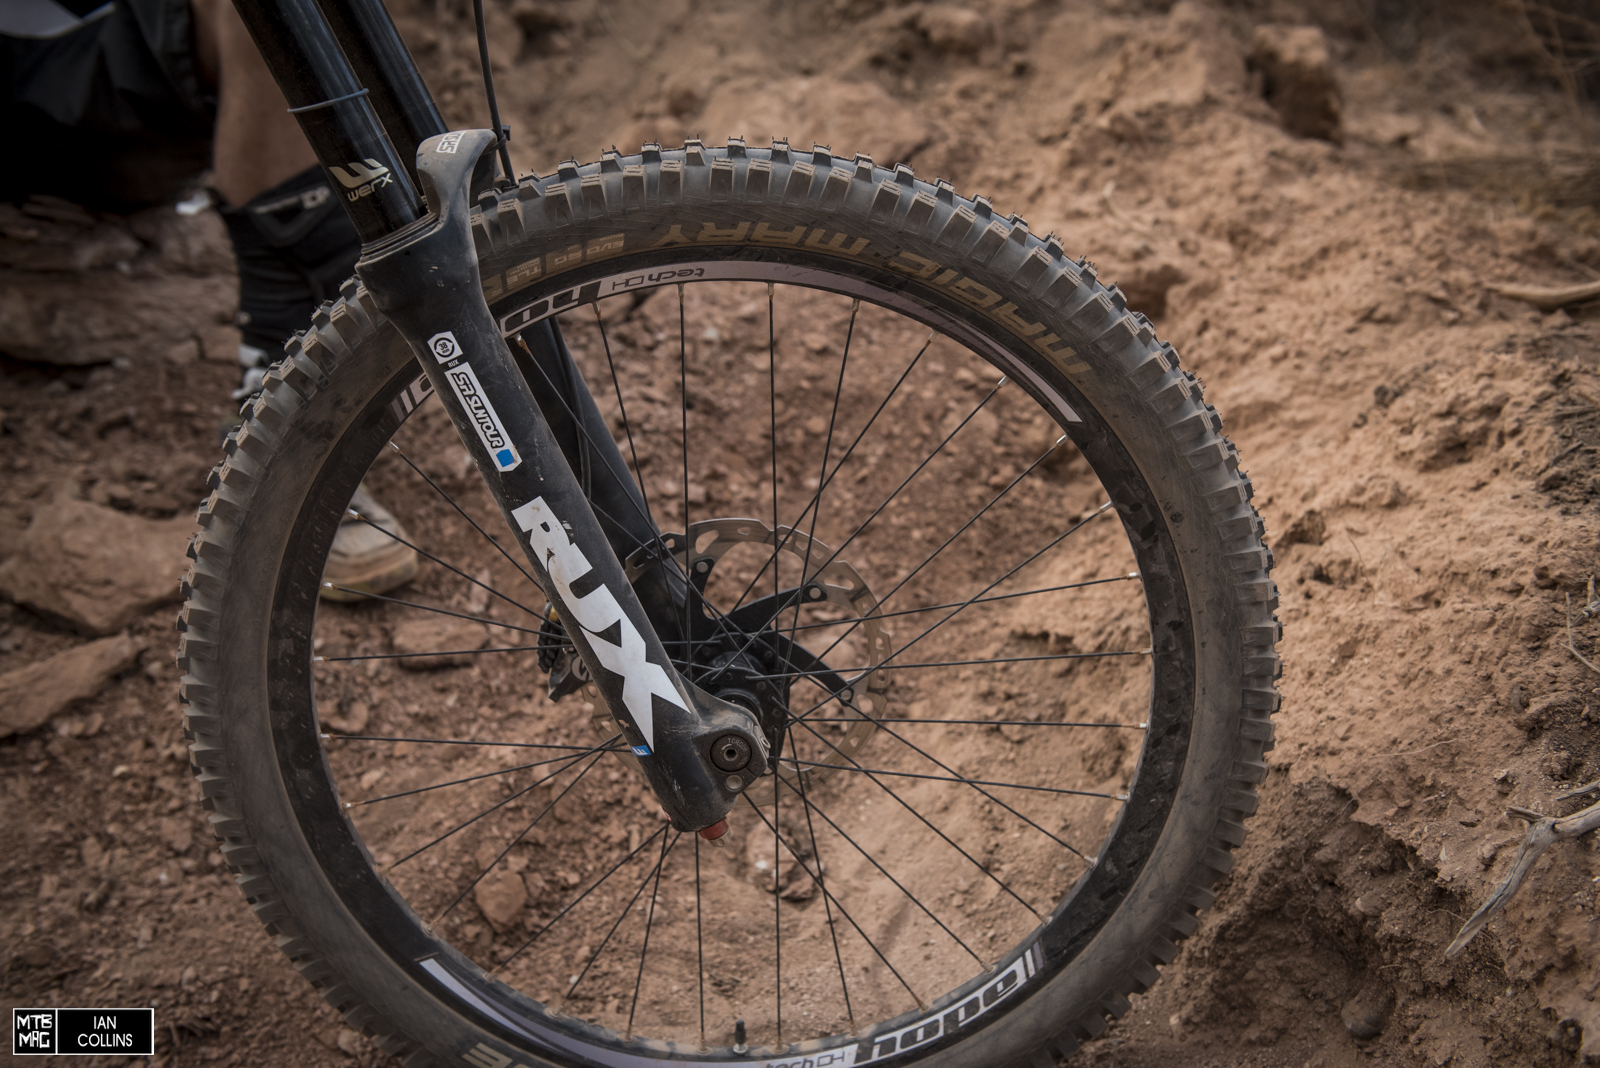 Suntour Rux.  The latest version of this fork is starting to look quite refined.  James Doerfling also rides on and seems to be loving it.  Hope wheels rolling on Schwalbe Muddy Mary tires in 2.35.